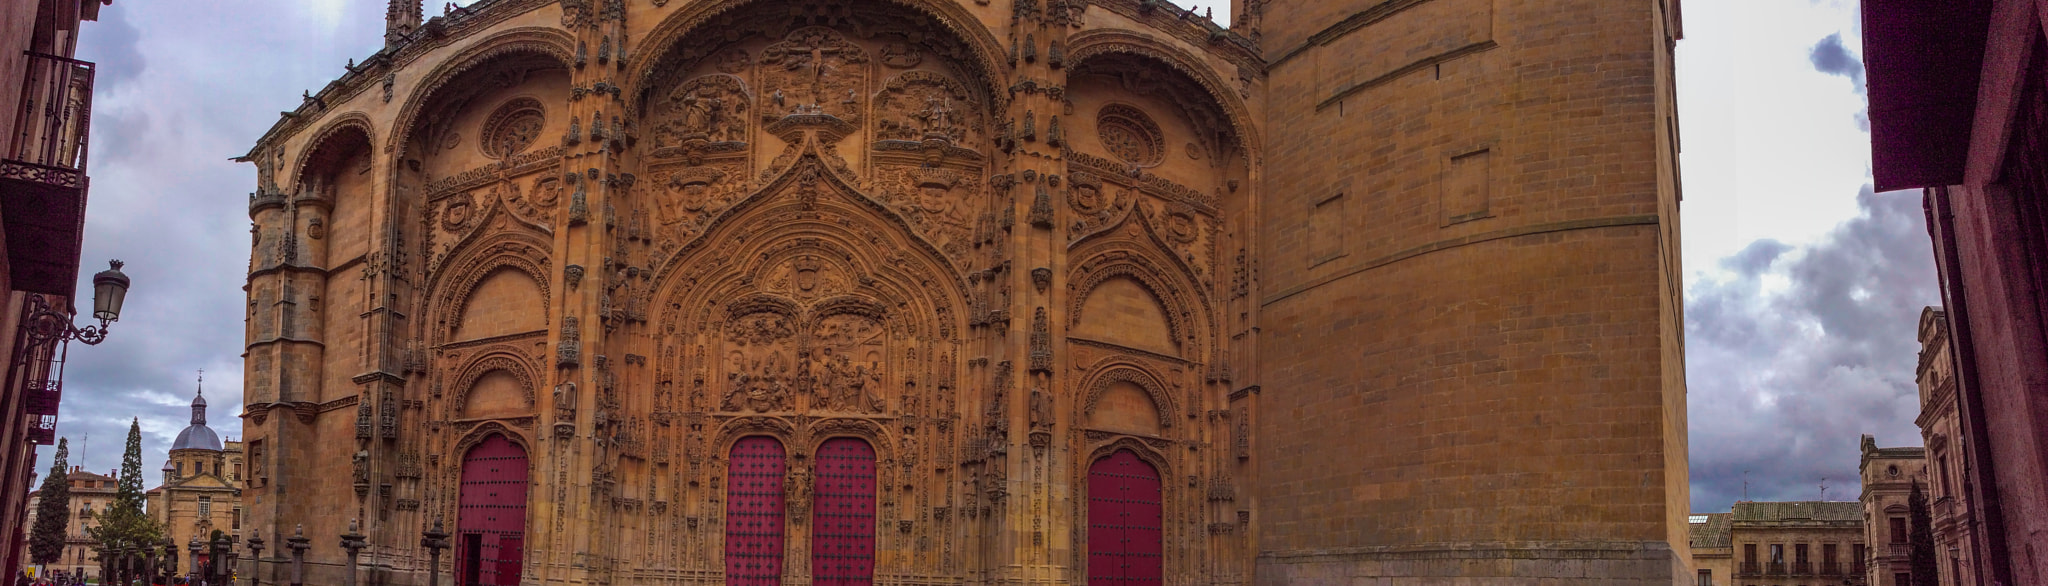 Apple iPad mini 2 sample photo. The front door of the cathedral of salamanca photography